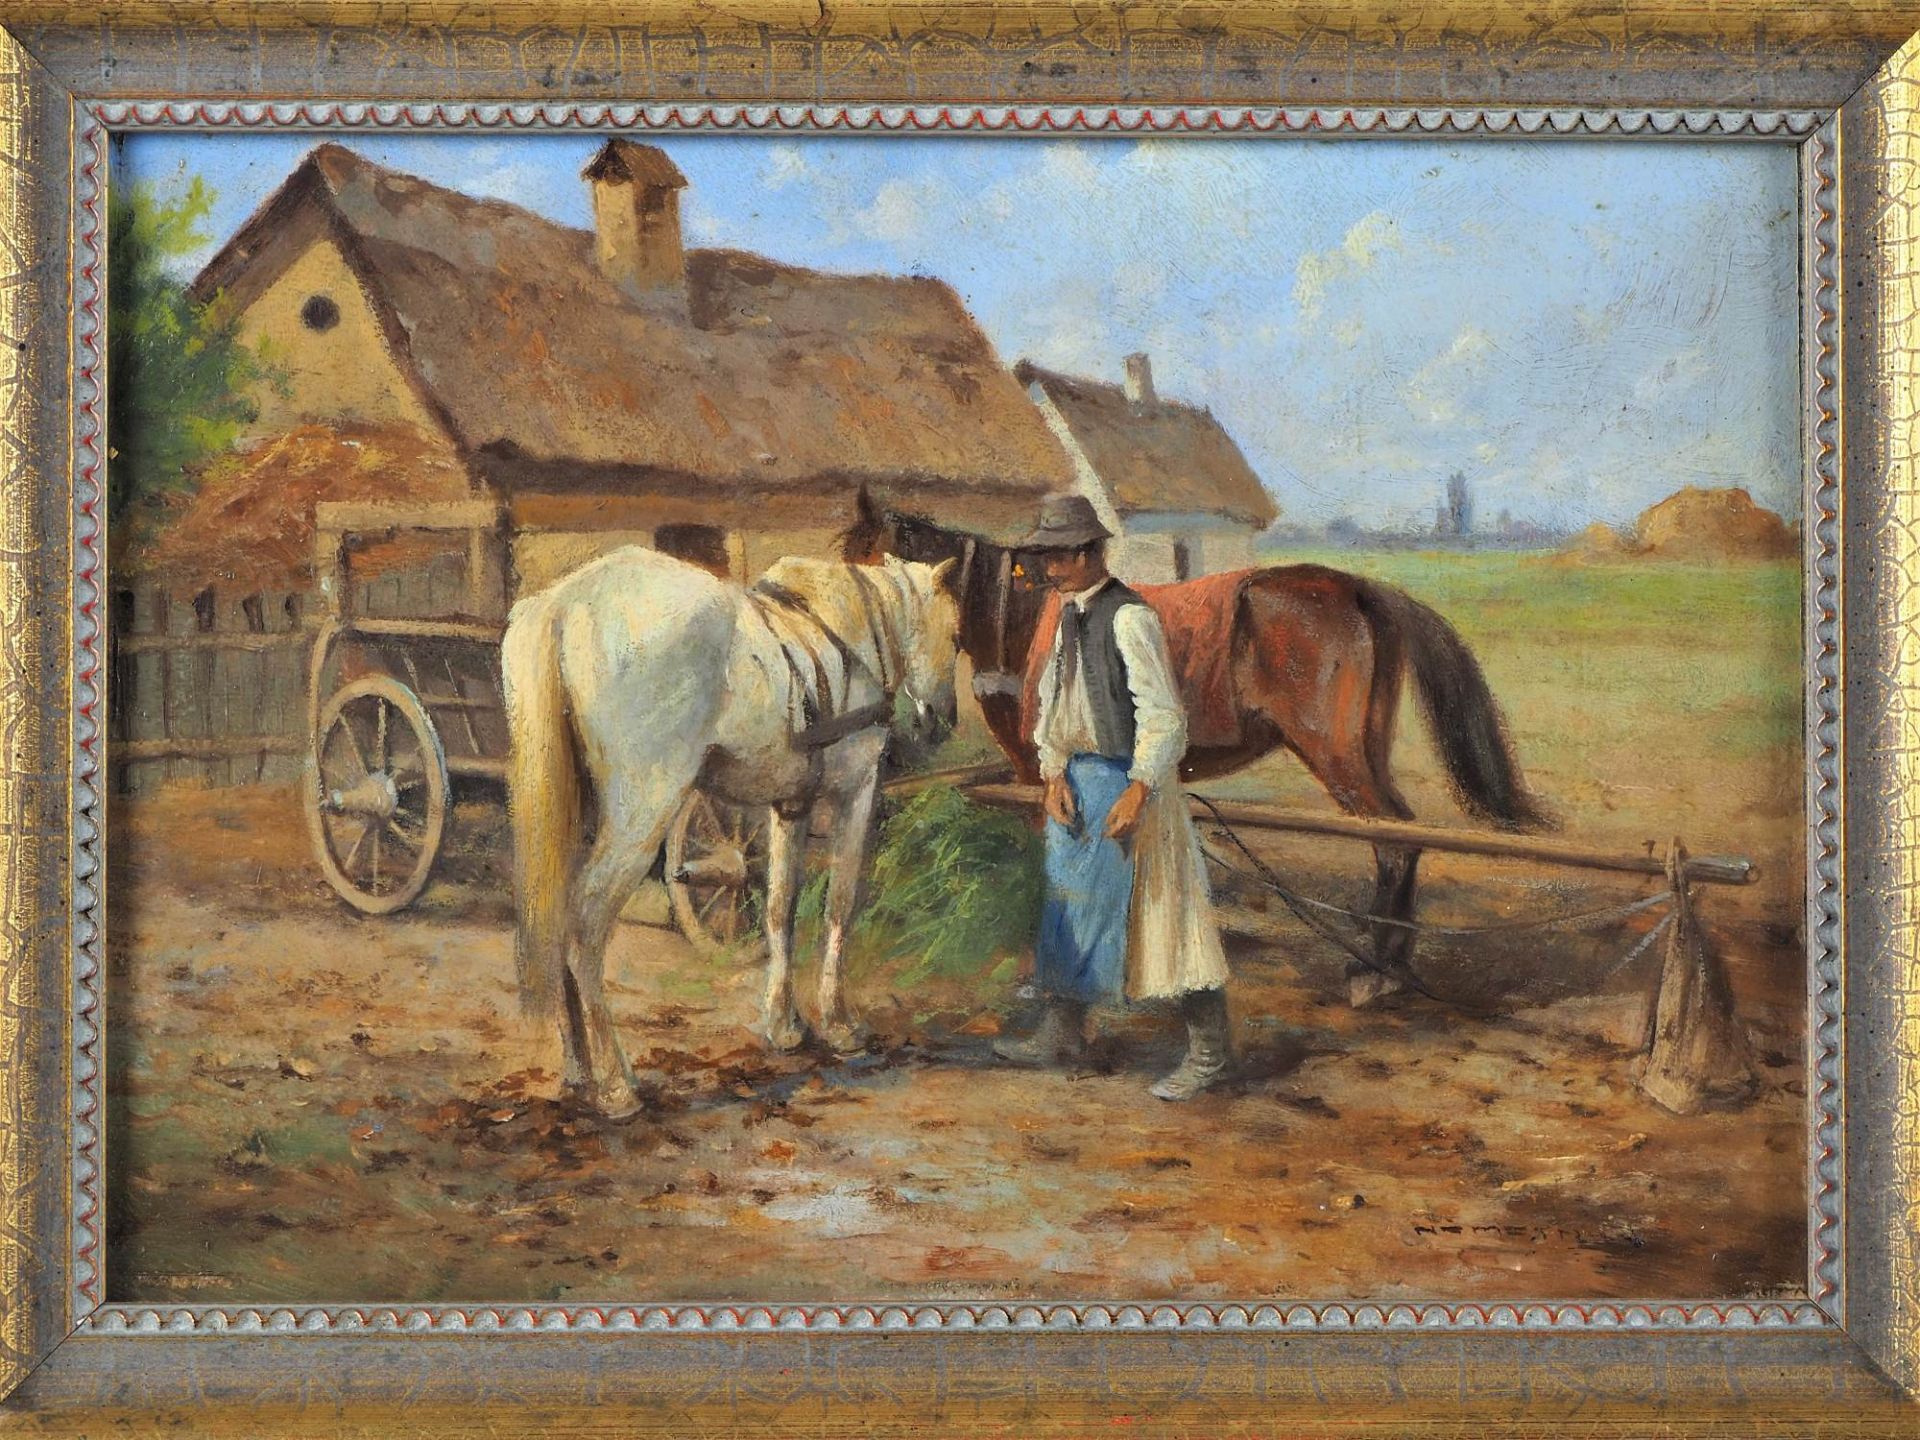 Small oil painting, probably Hungarian painter, horse team with farmer - sign. "Nemeth"